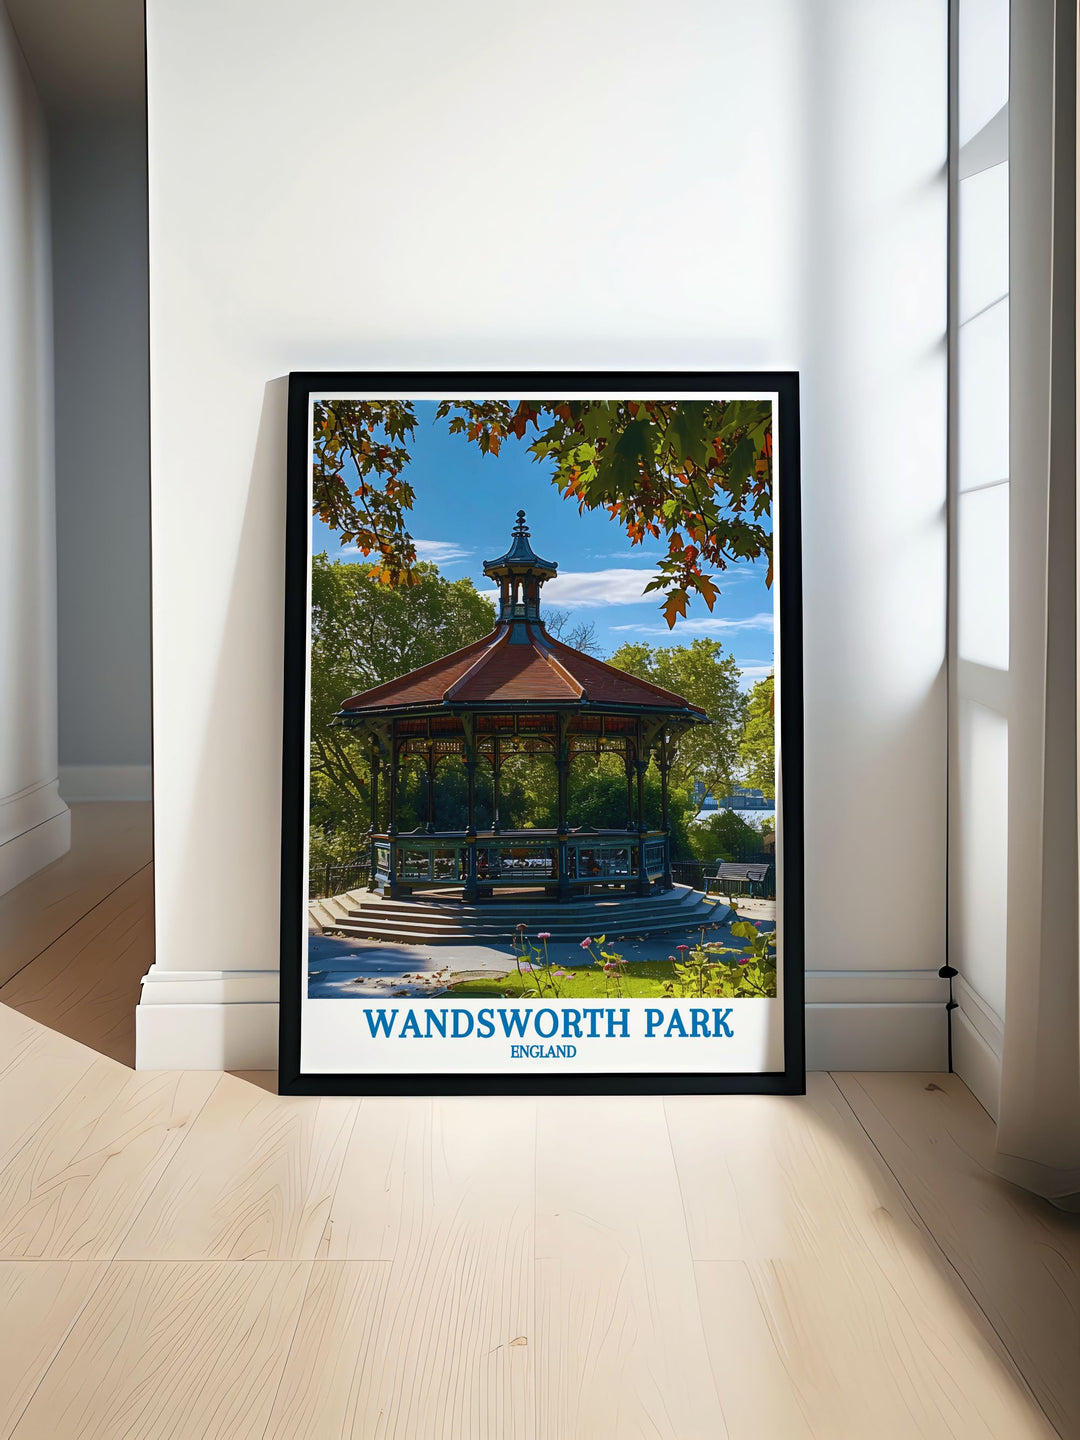 Featuring the iconic bandstand of Wandsworth Park, this travel poster beautifully illustrates the parks historical significance and scenic beauty. Ideal for those who appreciate fine art and the serene charm of Londons parks, this artwork brings a piece of Wandsworths rich heritage into your living space, offering a glimpse into the past.